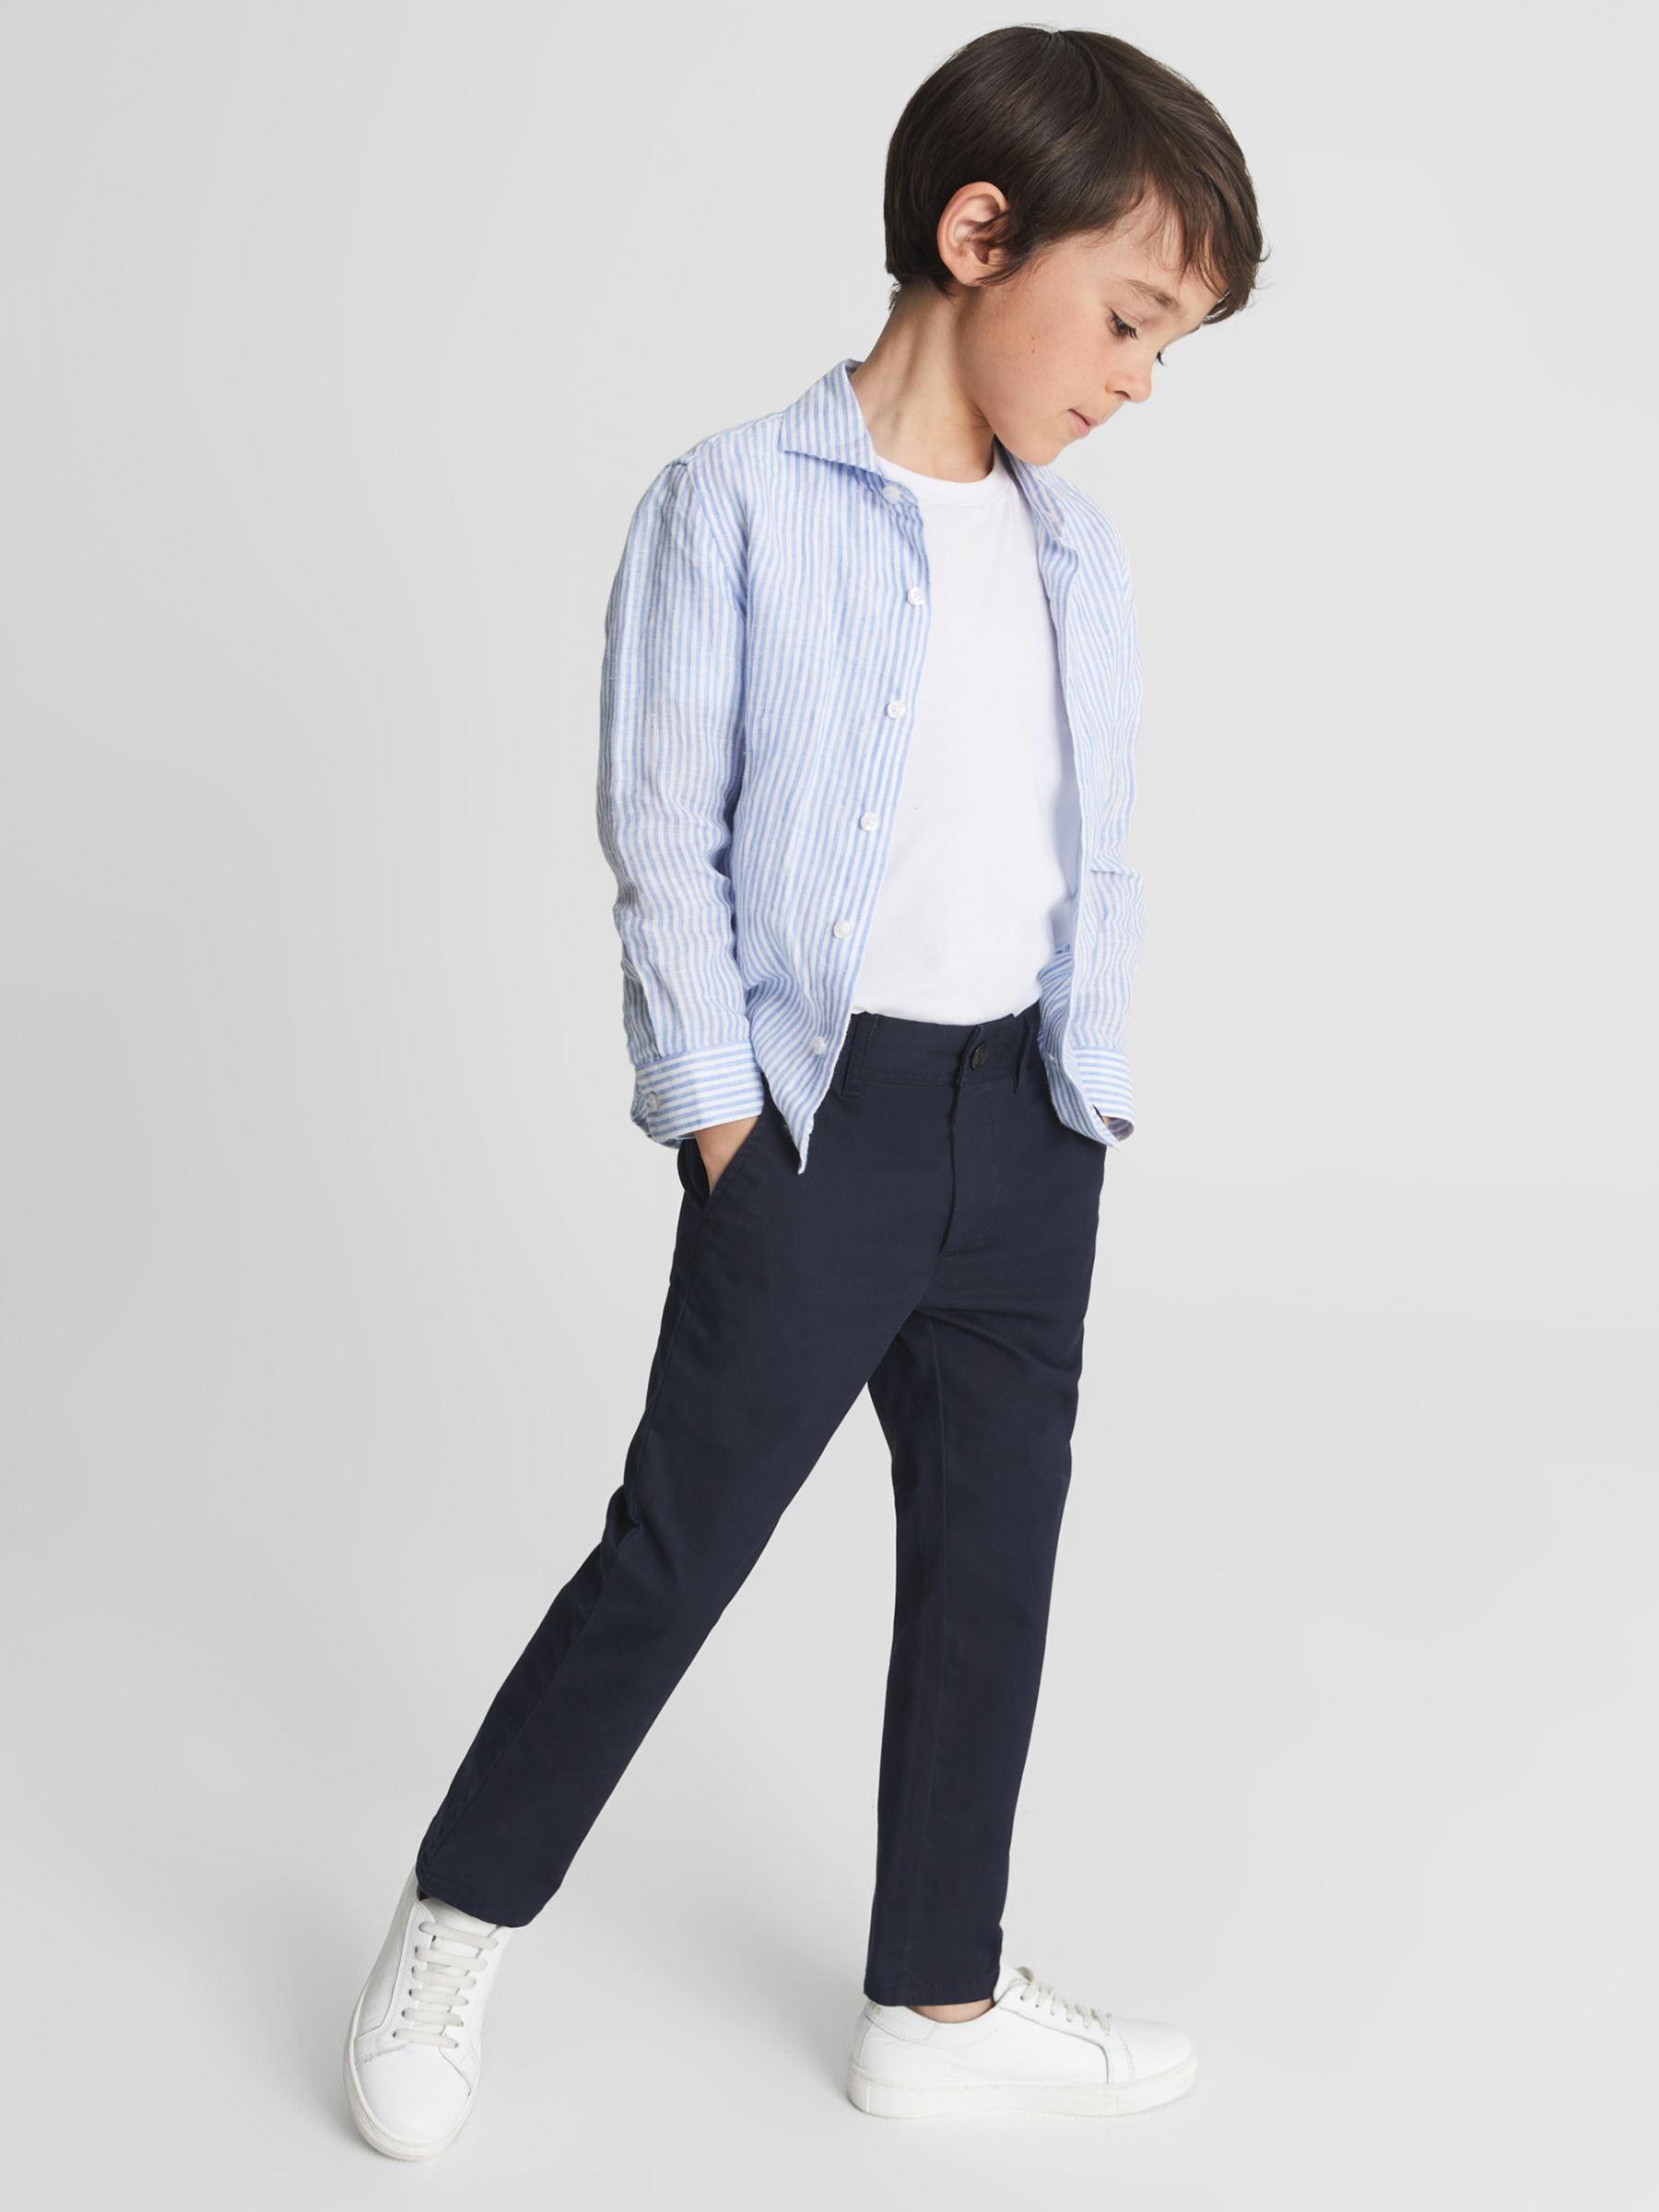 Buy Reiss Kids' Pitch Slim Fit Chino Trousers Online at johnlewis.com